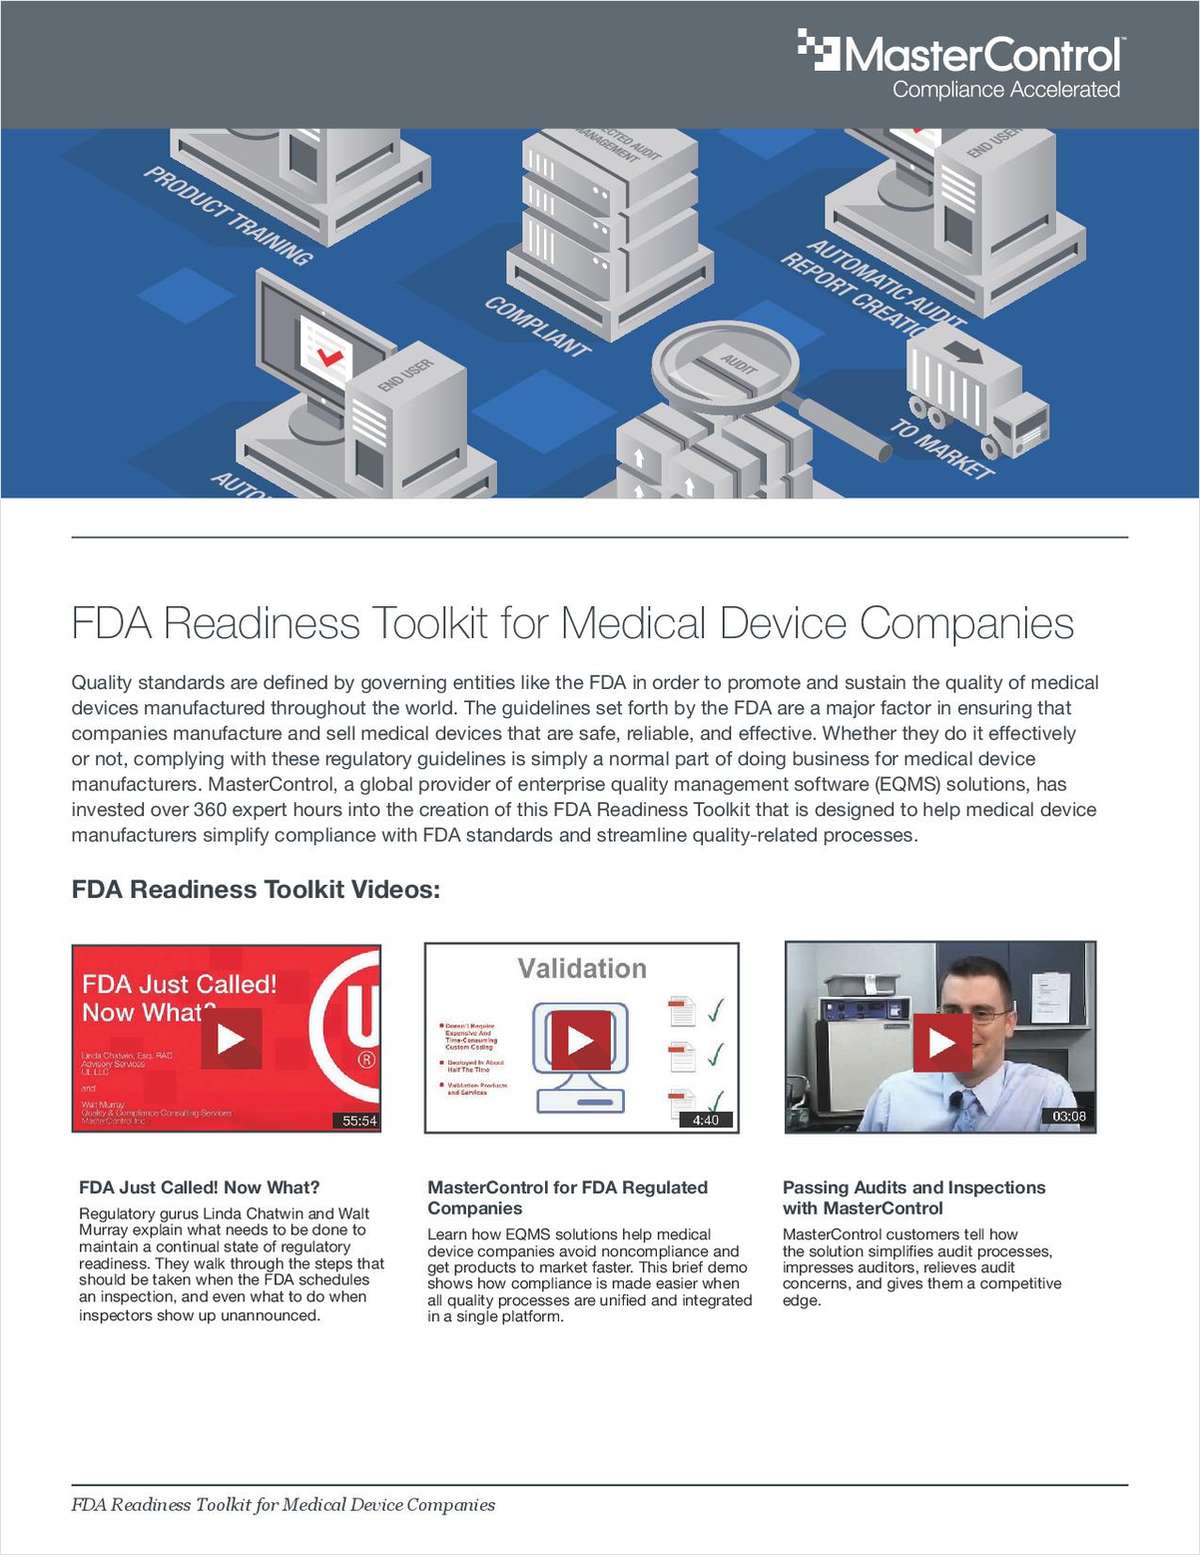 FDA Readiness Toolkit for Medical Device Companies